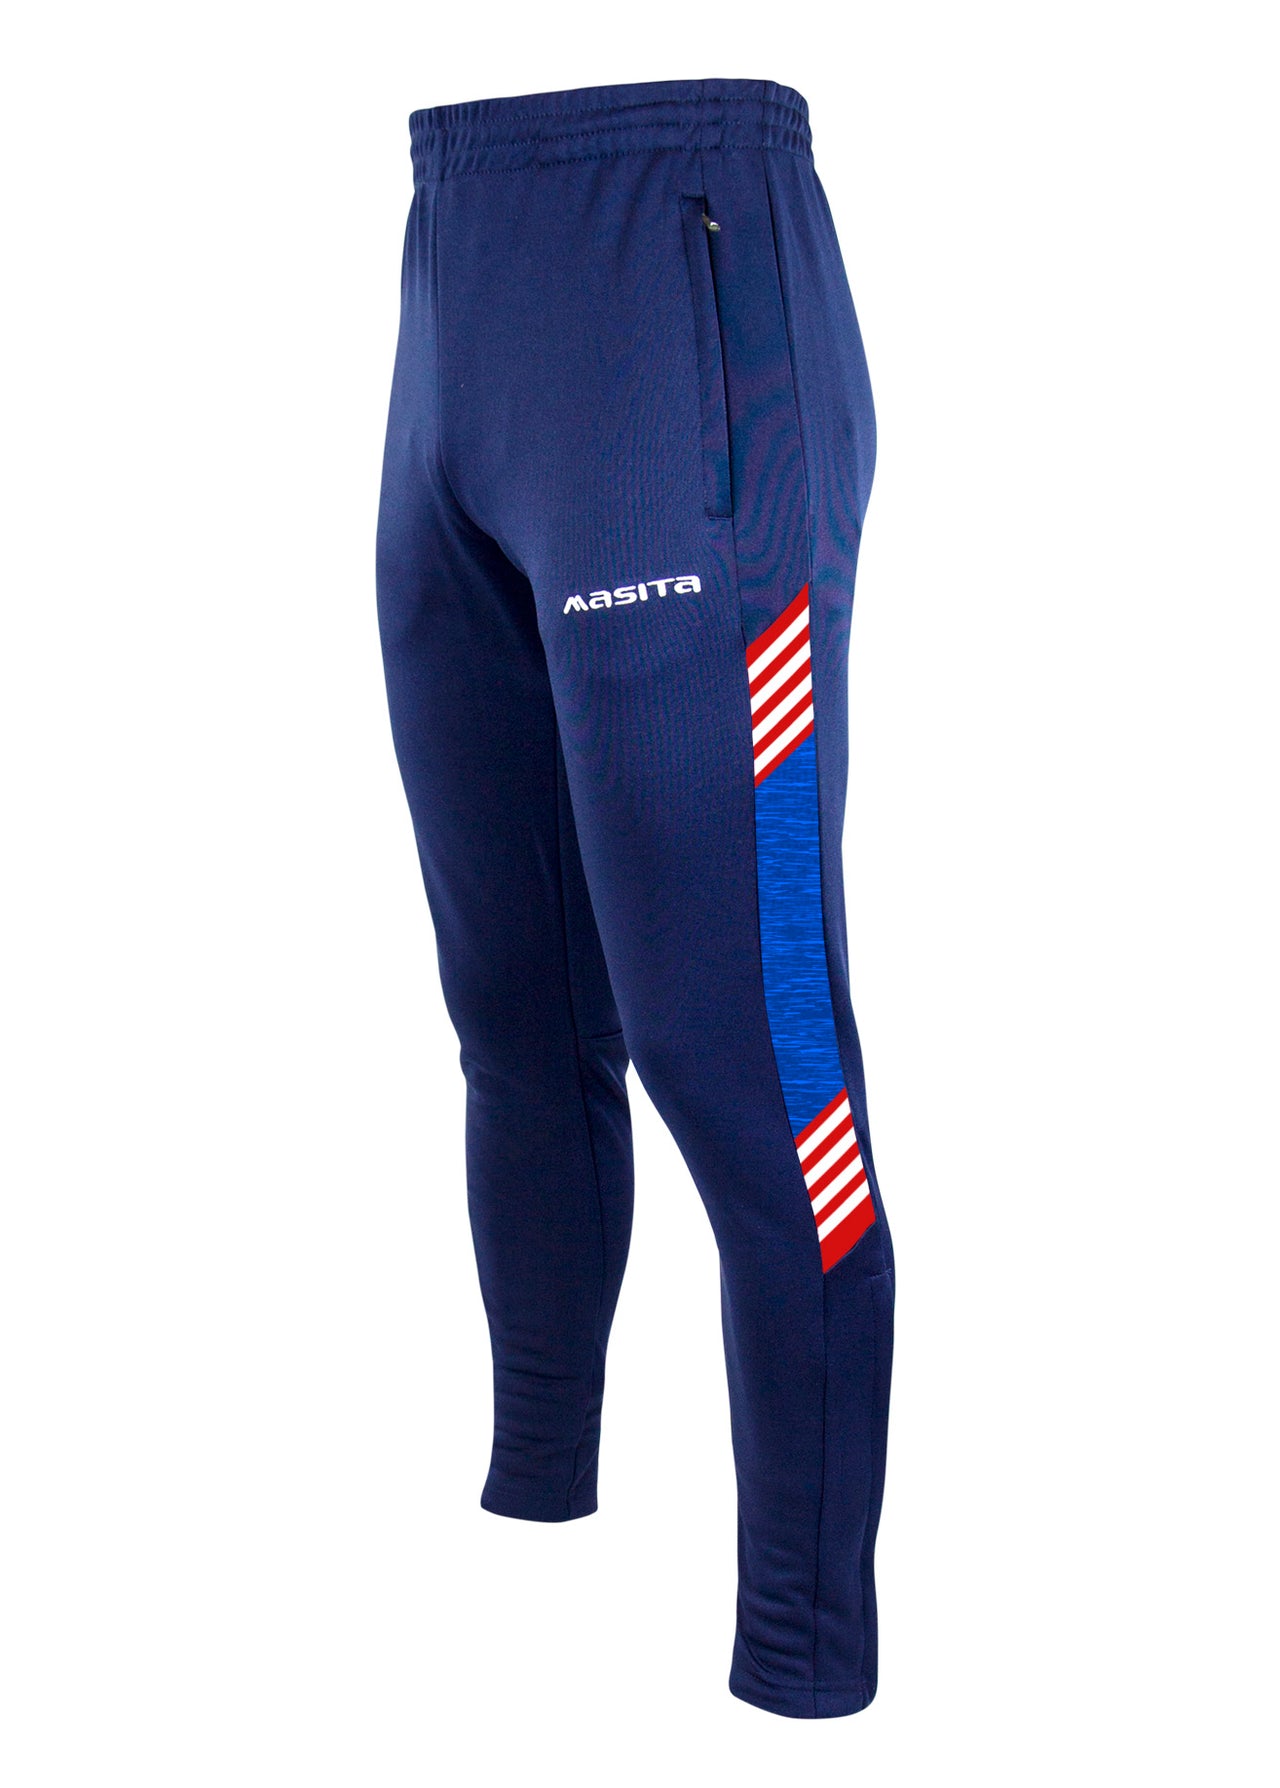 Hydro Skinny Bottoms Navy/Blue/Red/White Adult